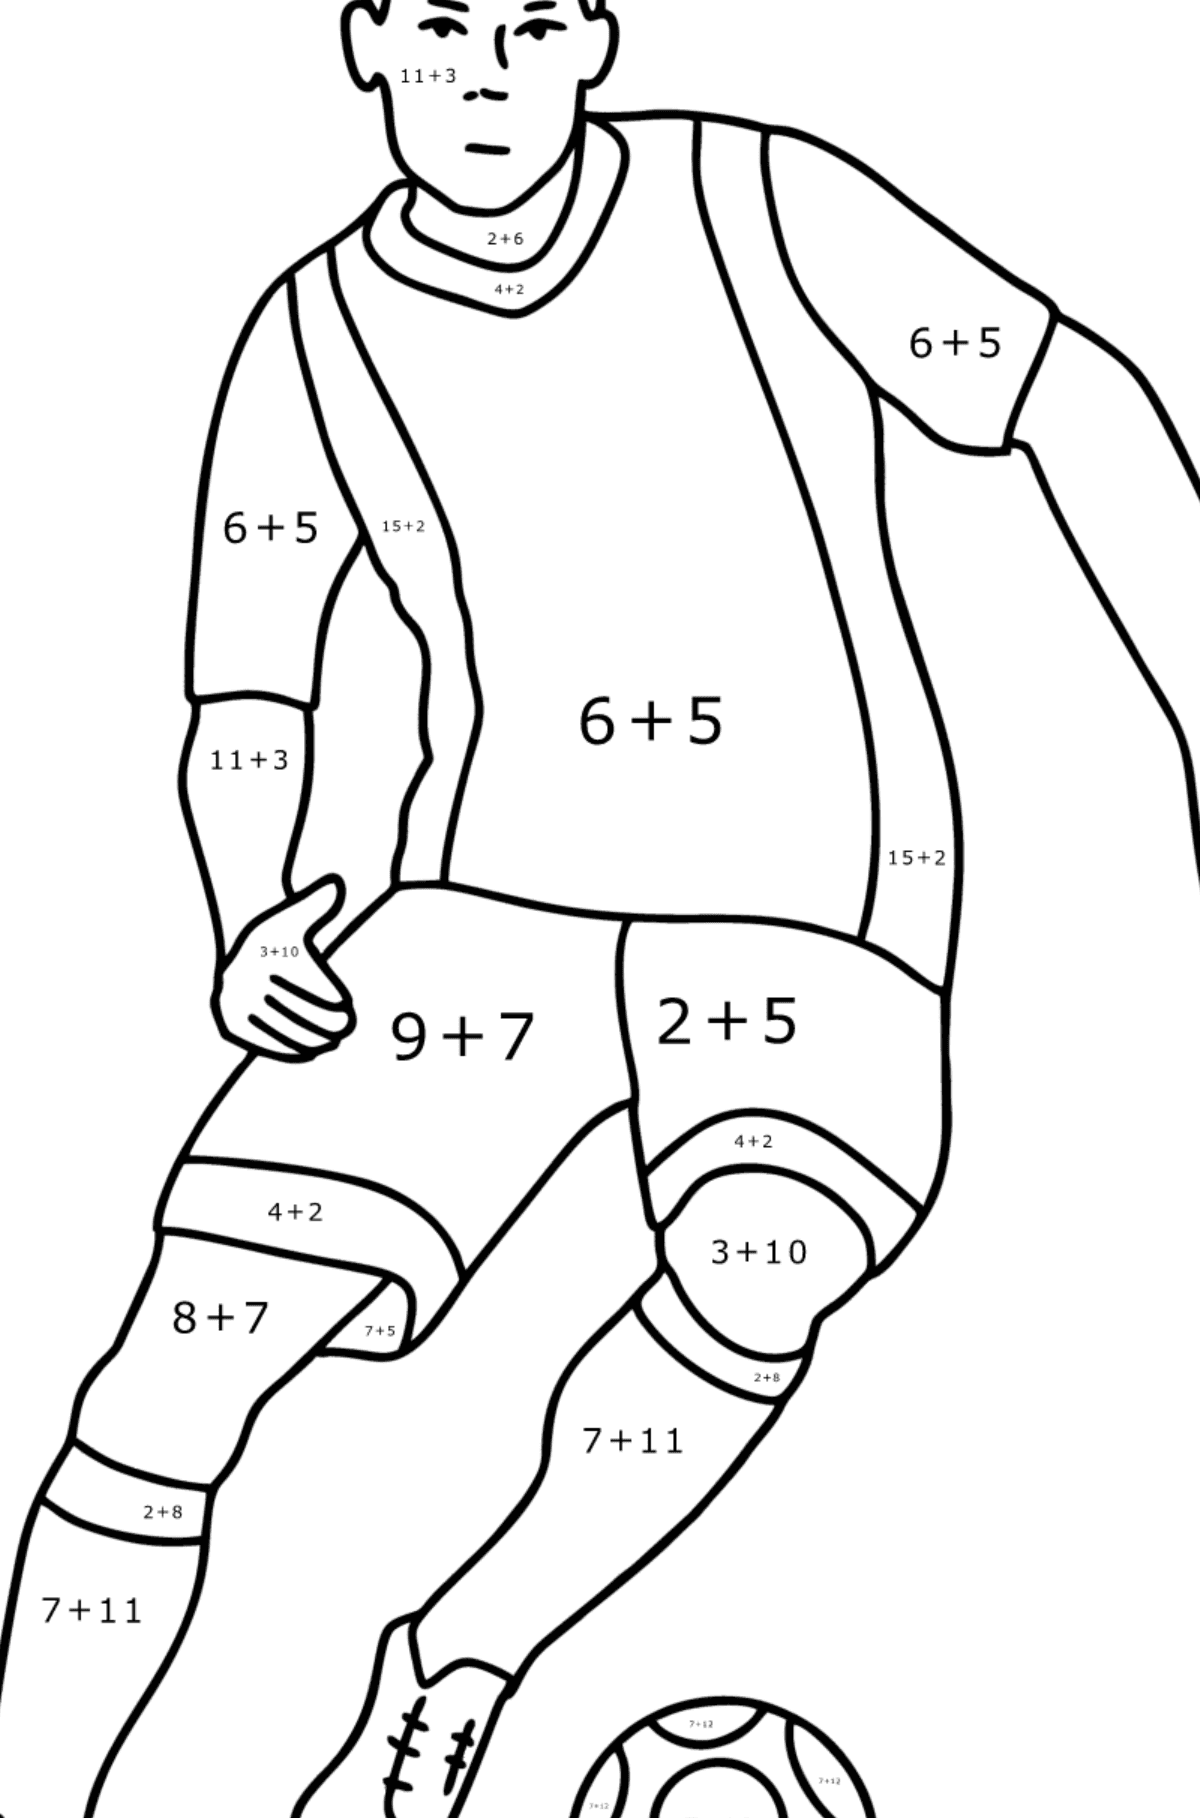 UEFA Football Player сoloring page - Math Coloring - Addition for Kids